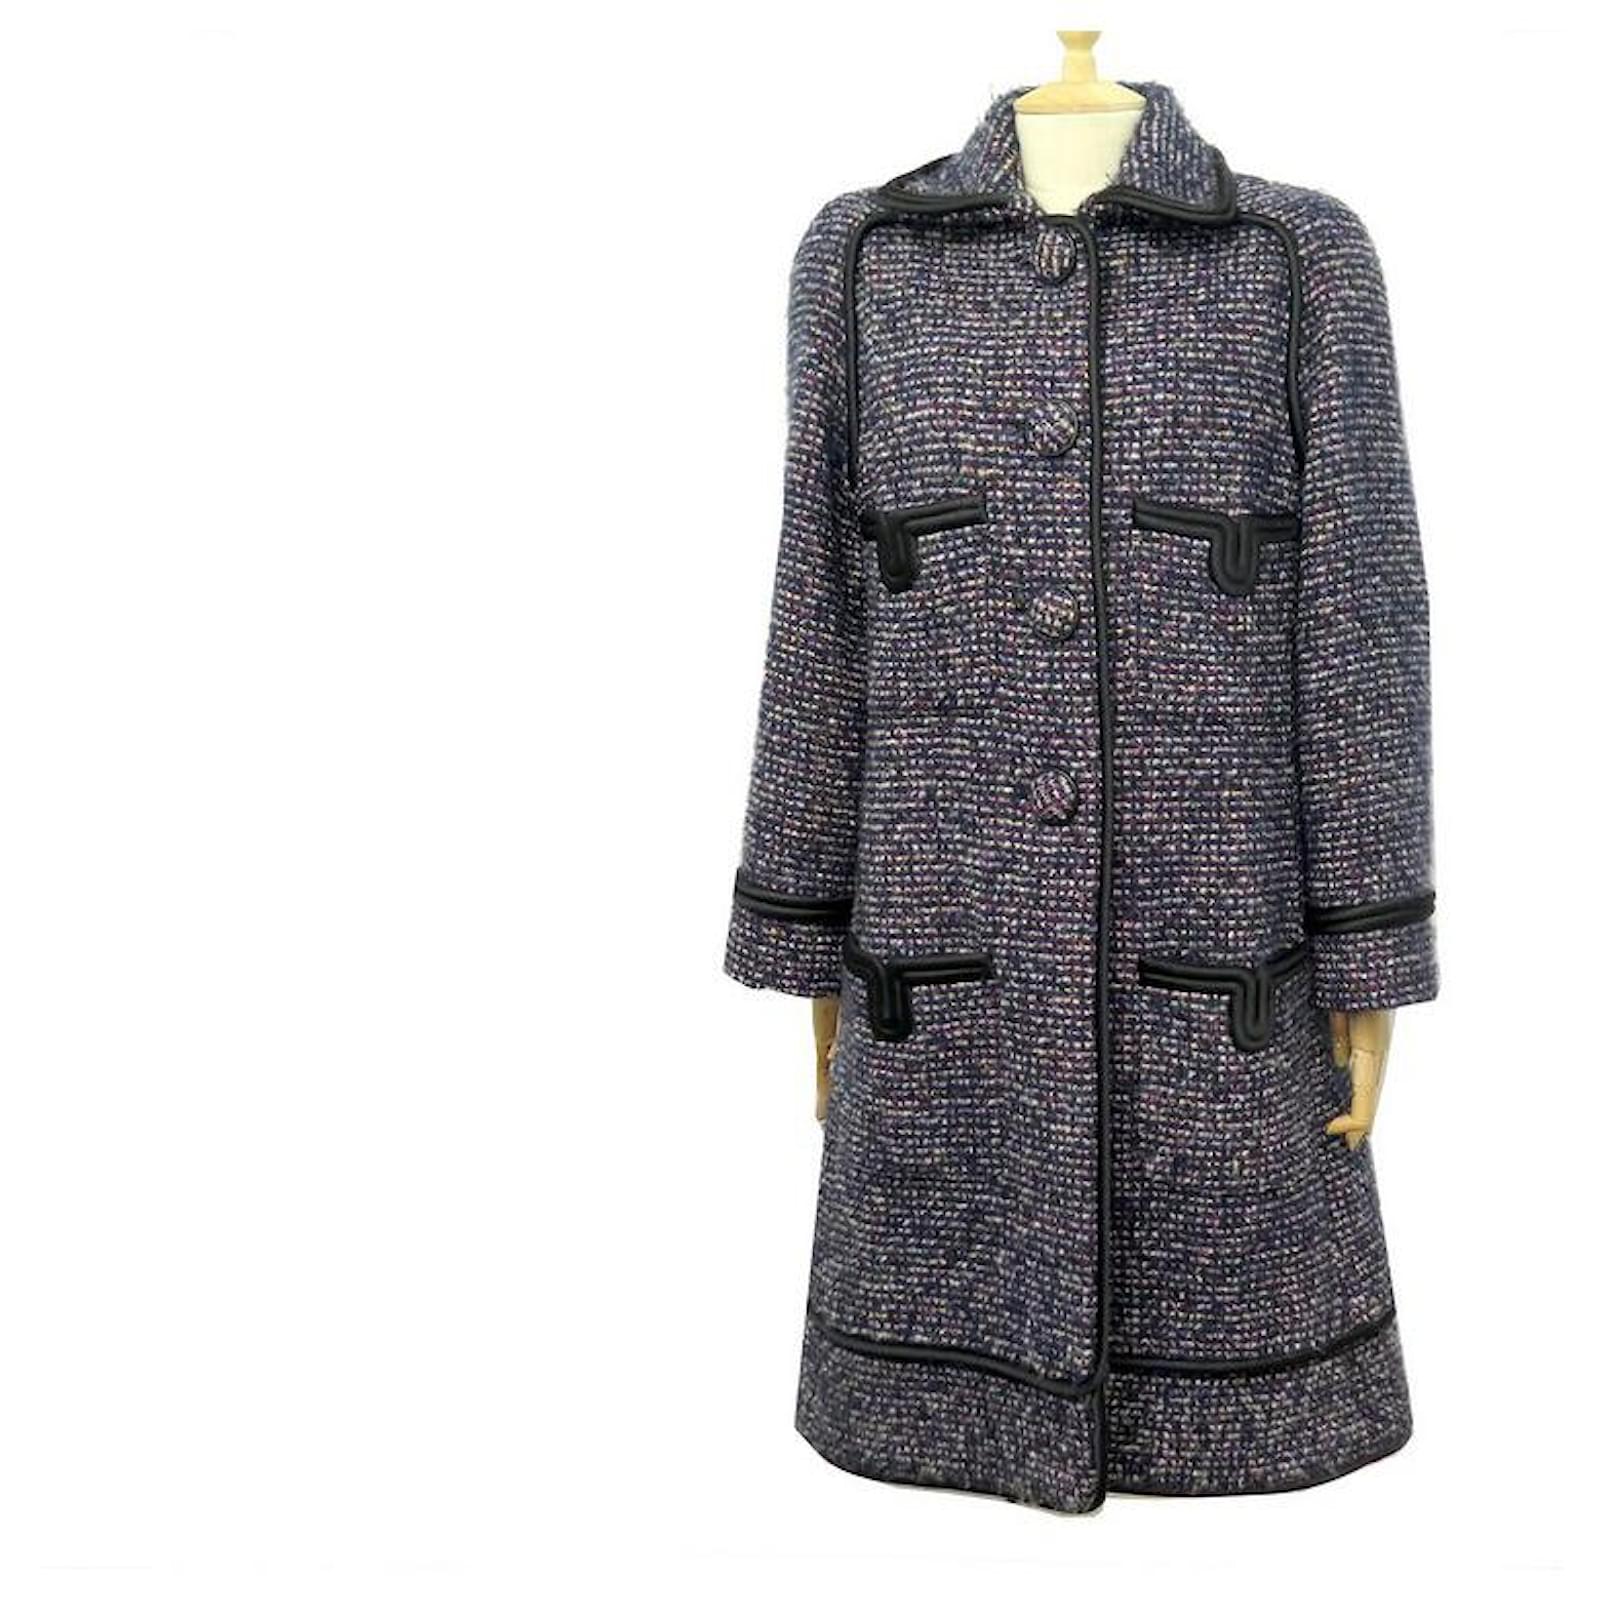 NEW CHANEL P LONG COAT52270 M 40 MULTICOLORED CASHMERE TWEED COAT